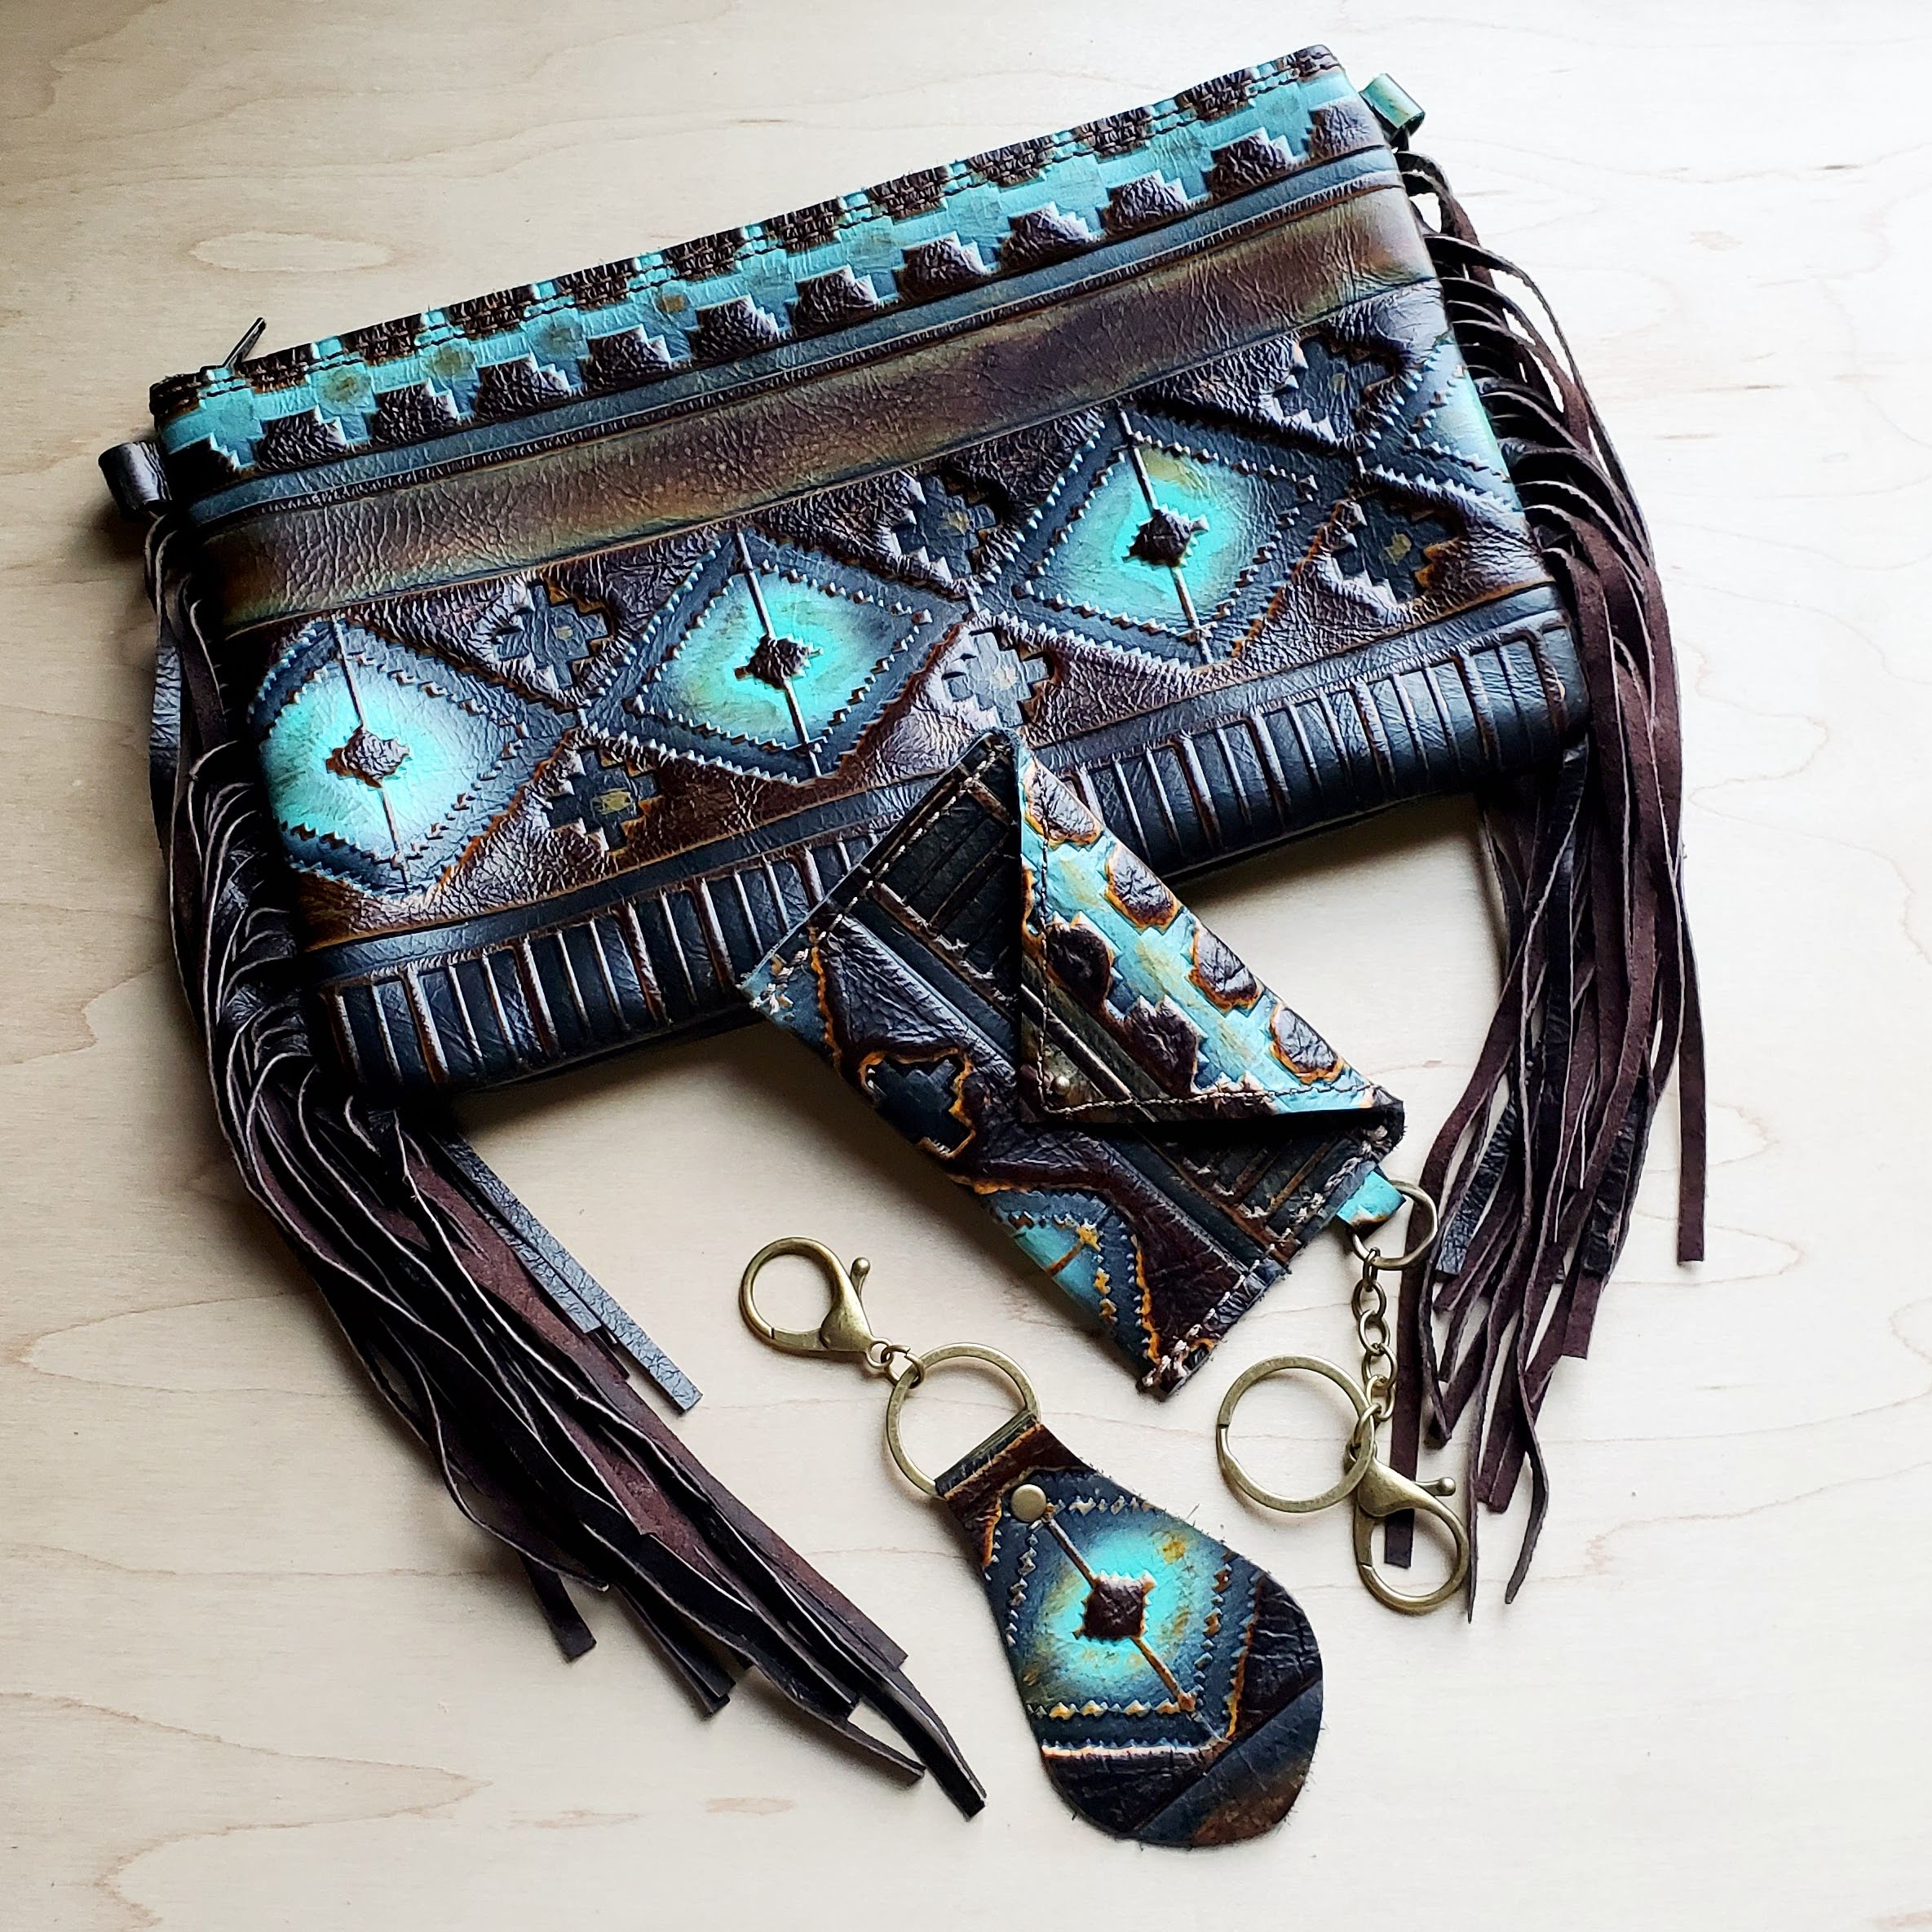 Leather Clutch Purse with Beaded Decoration